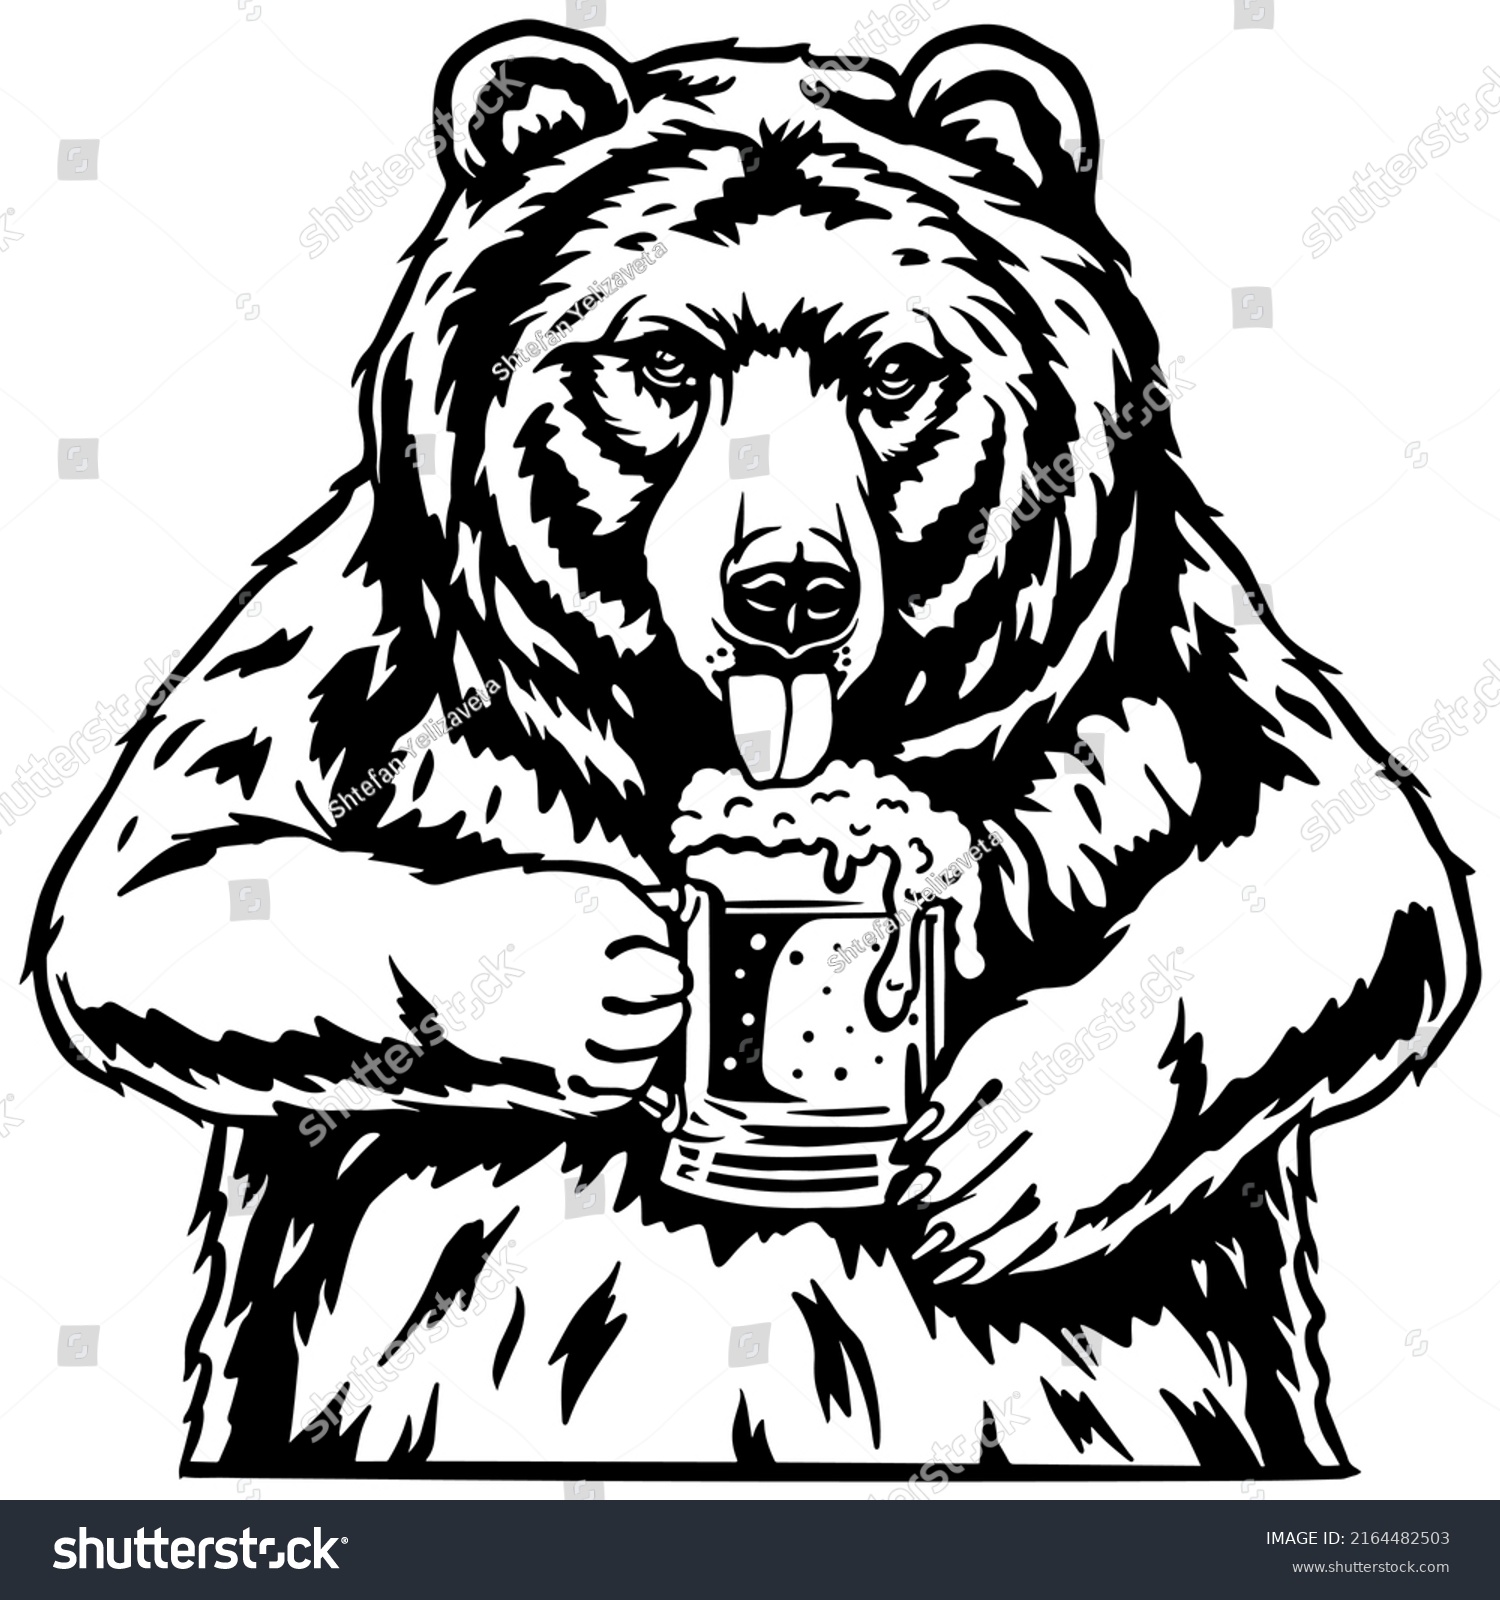 SVG of Papa bear drinking beer. Emblem with brewery bear, brewery hop and bavarian hat. Craft brewing for beer bar or pab. svg